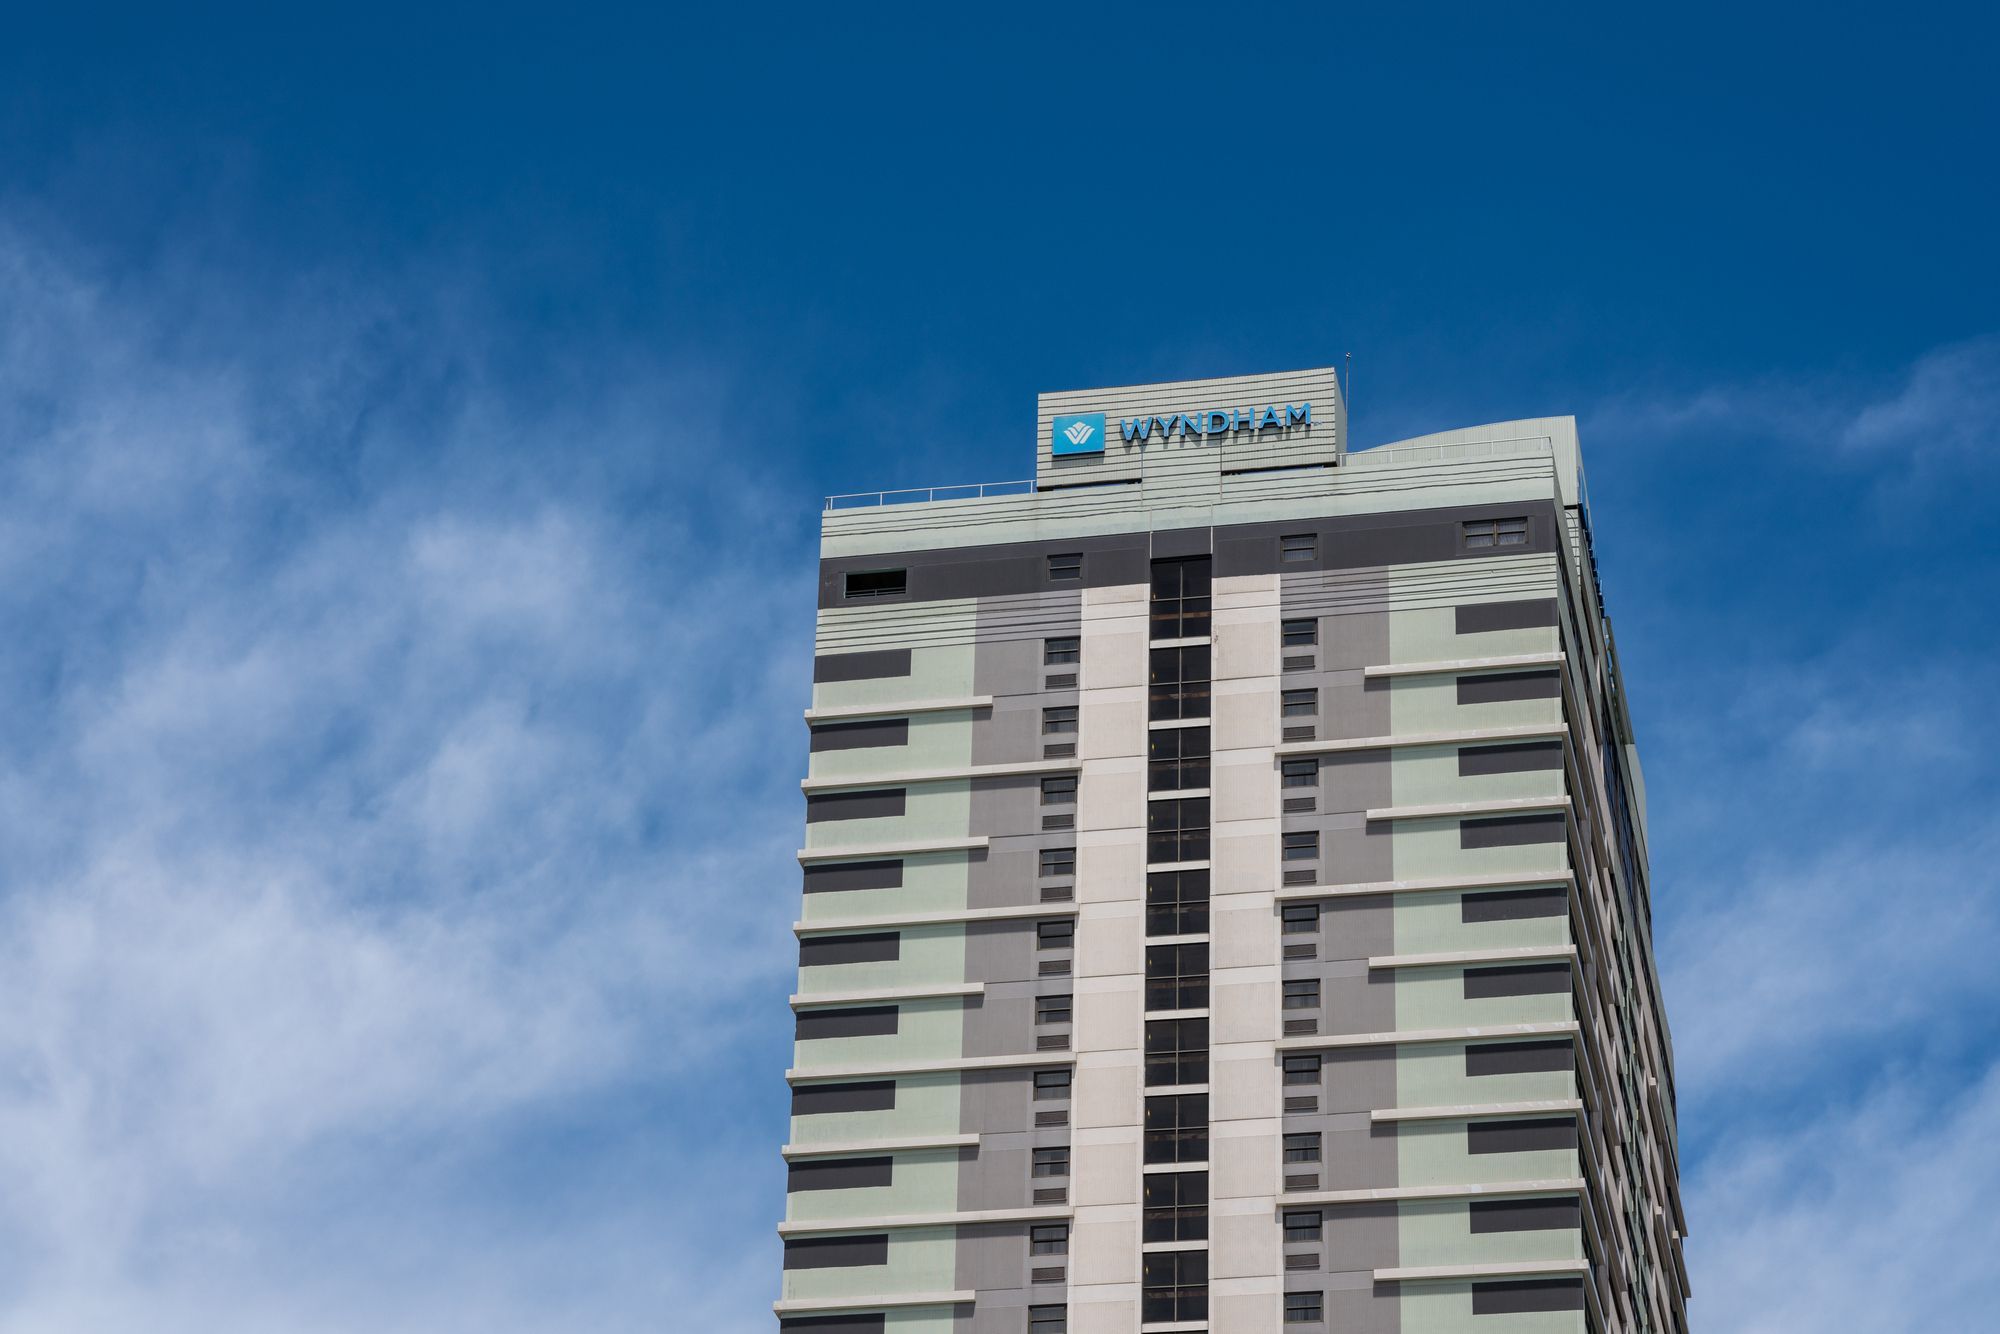 A Wyndham class action has been filed for creating a credit card without consent.